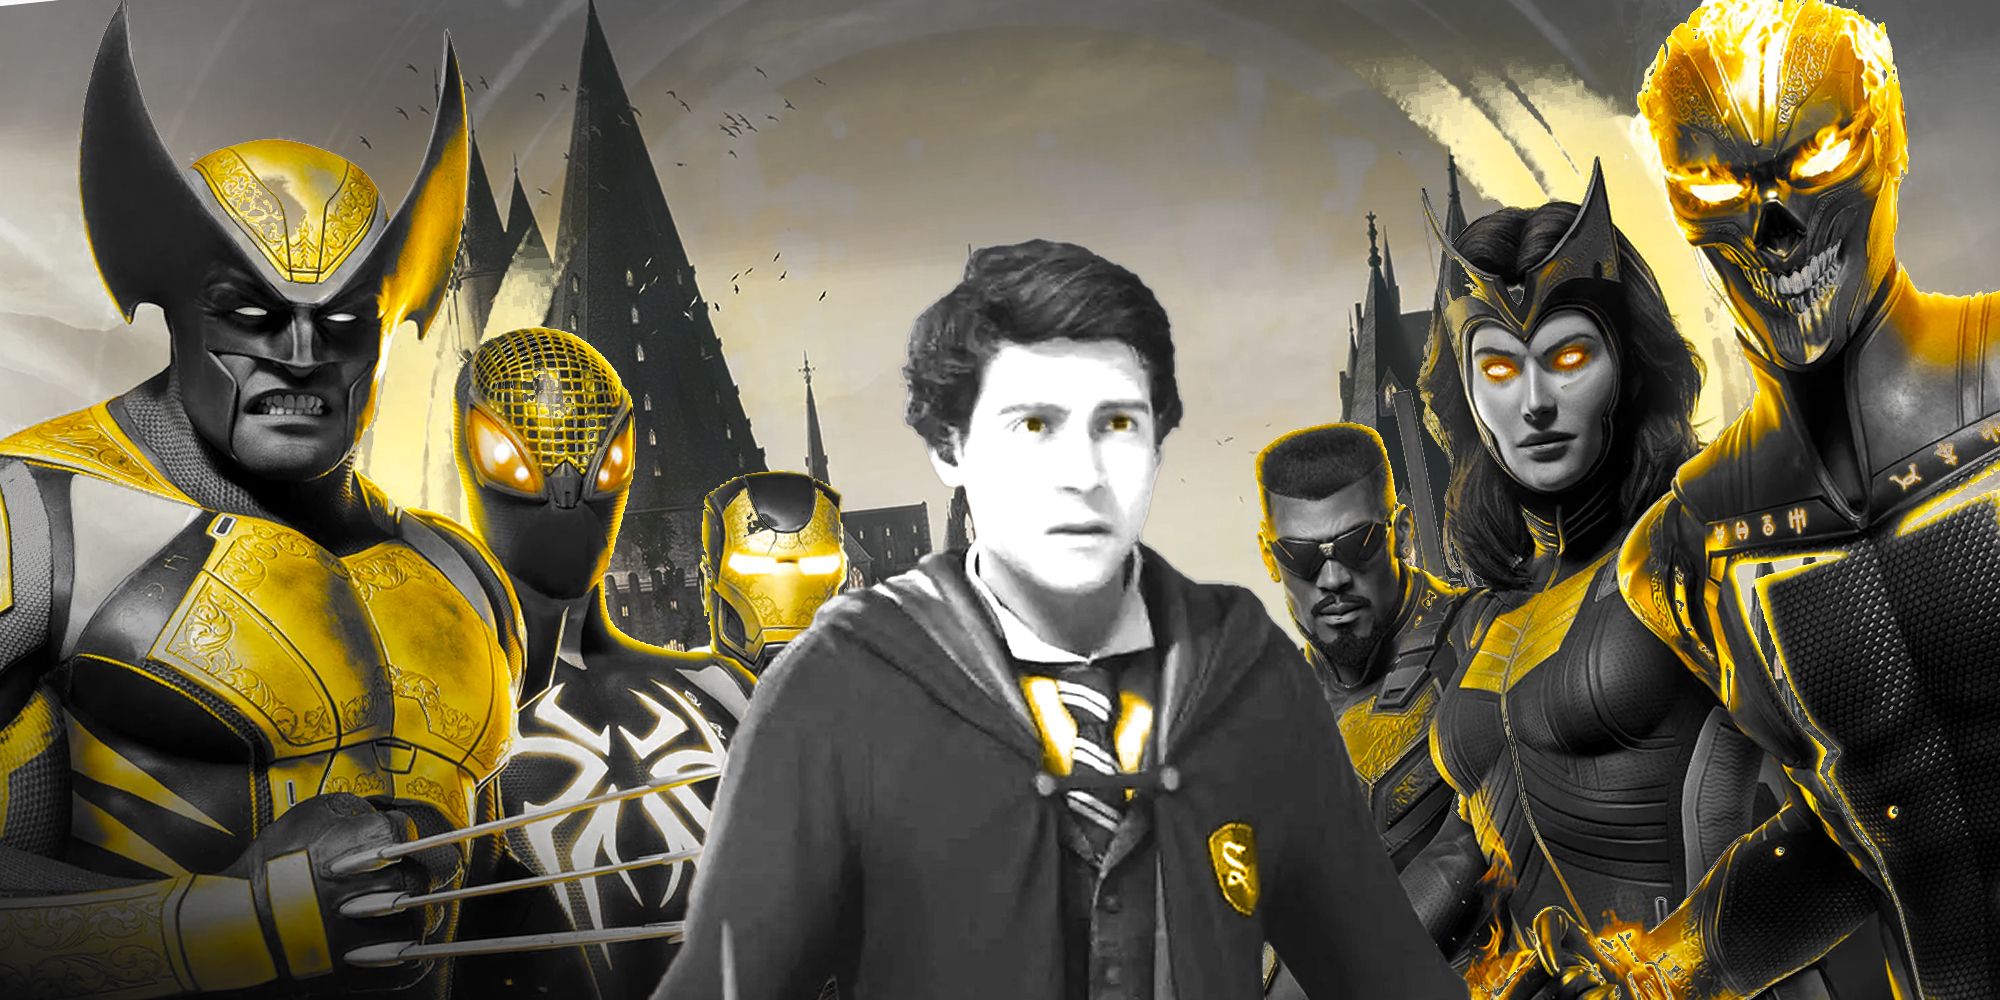 A Hogwarts Legacy character superimposed on the Midnight Suns box art, surrounded by Wolverine, Spider-Man, Iron Man, Blade, Wanda, and Ghost Rider